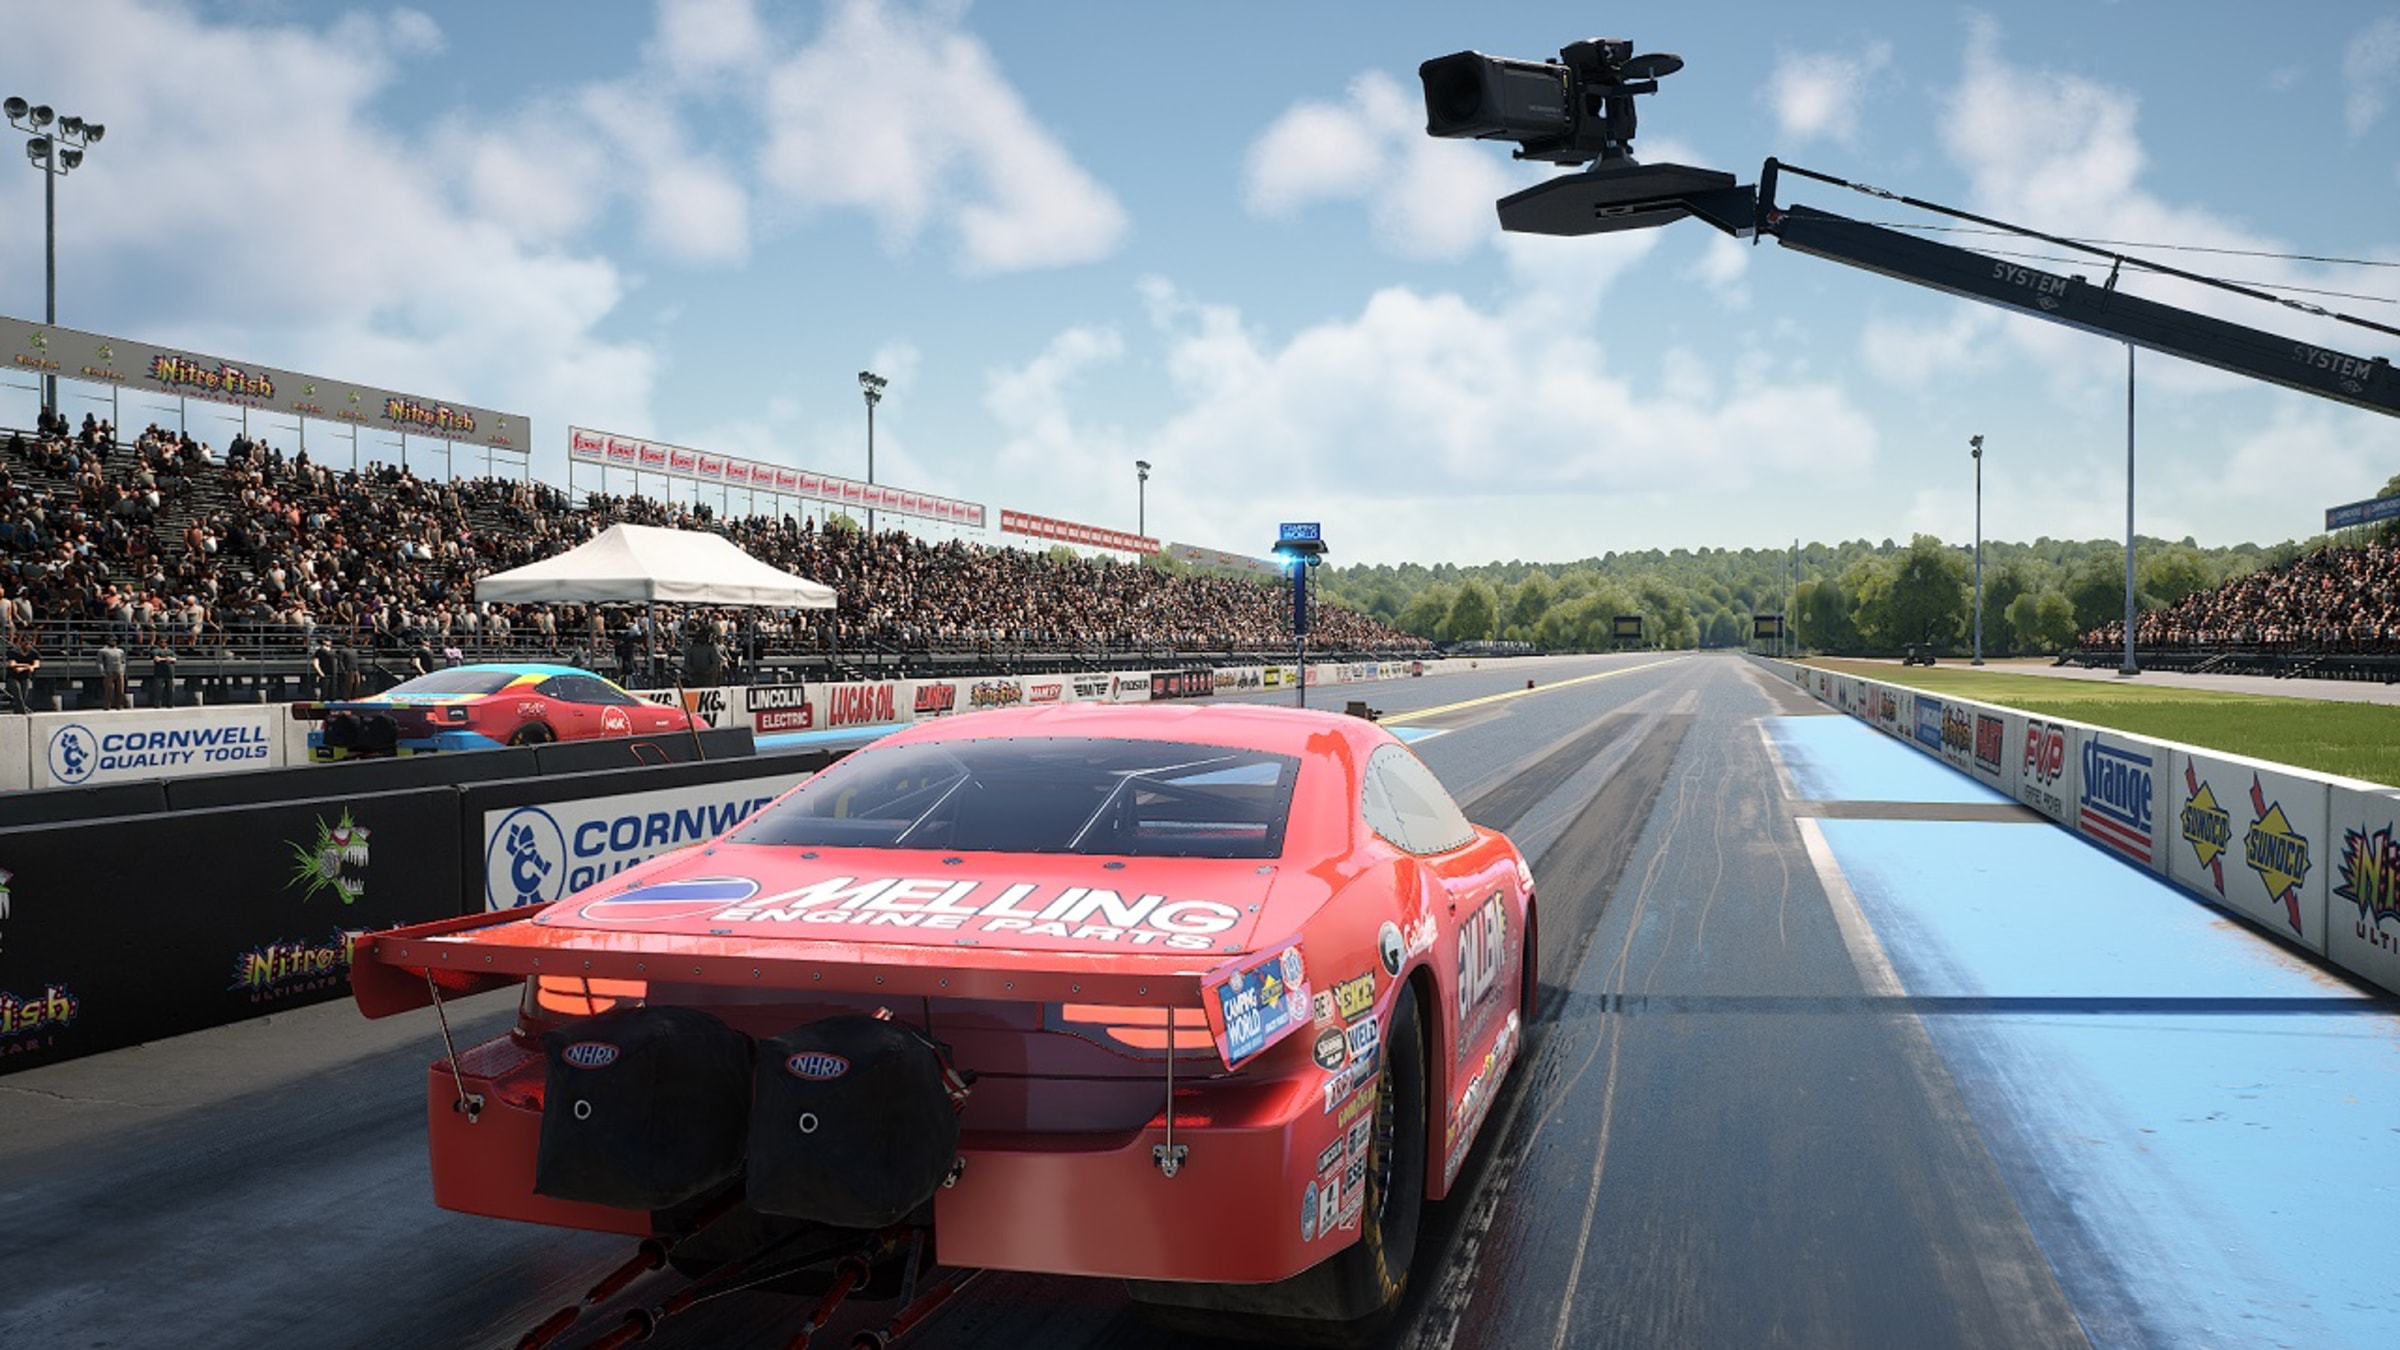 https://assets.nintendo.com/image/upload/c_fill,w_1200/q_auto:best/f_auto/dpr_2.0/ncom/en_US/games/switch/n/nhra-championship-drag-racing-speed-for-all-switch/